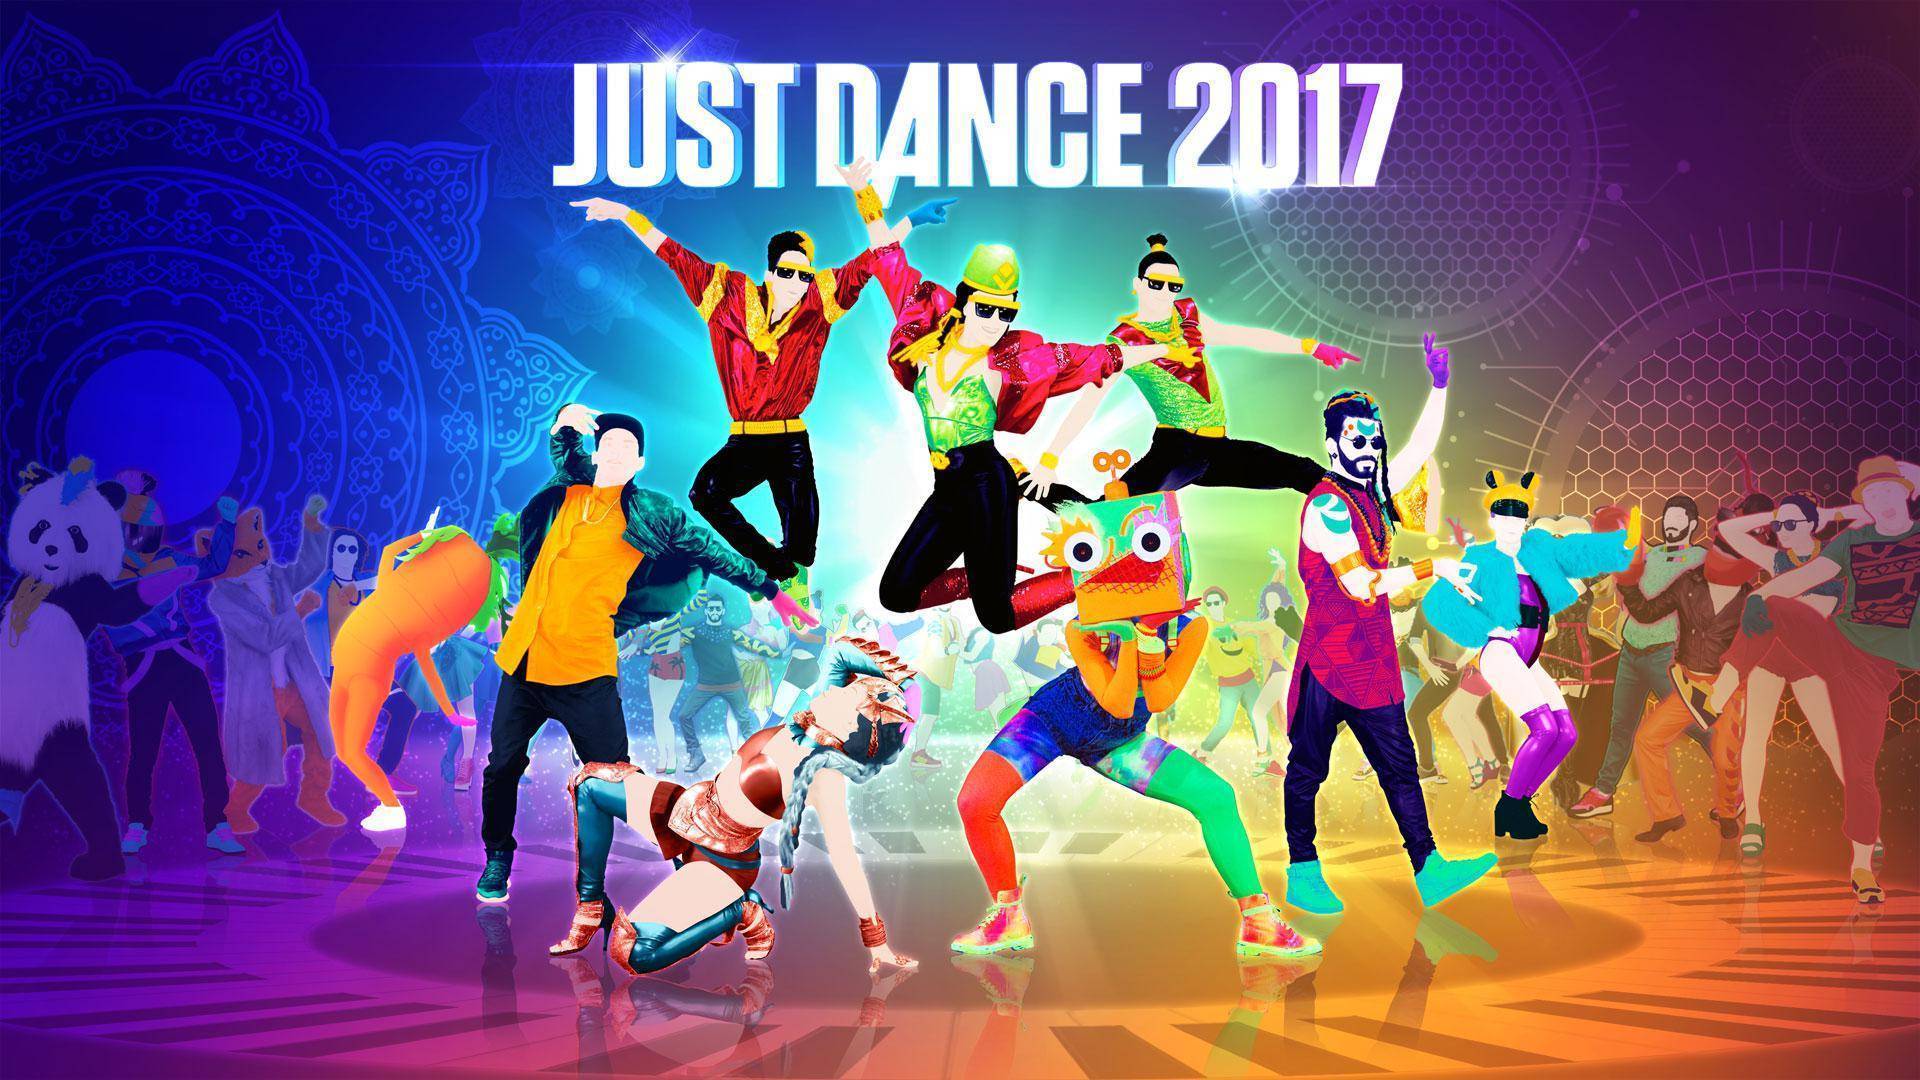 Overdreven Syndicate pædagog Just Dance 2017 (PS4) cheap - Price of $17.17